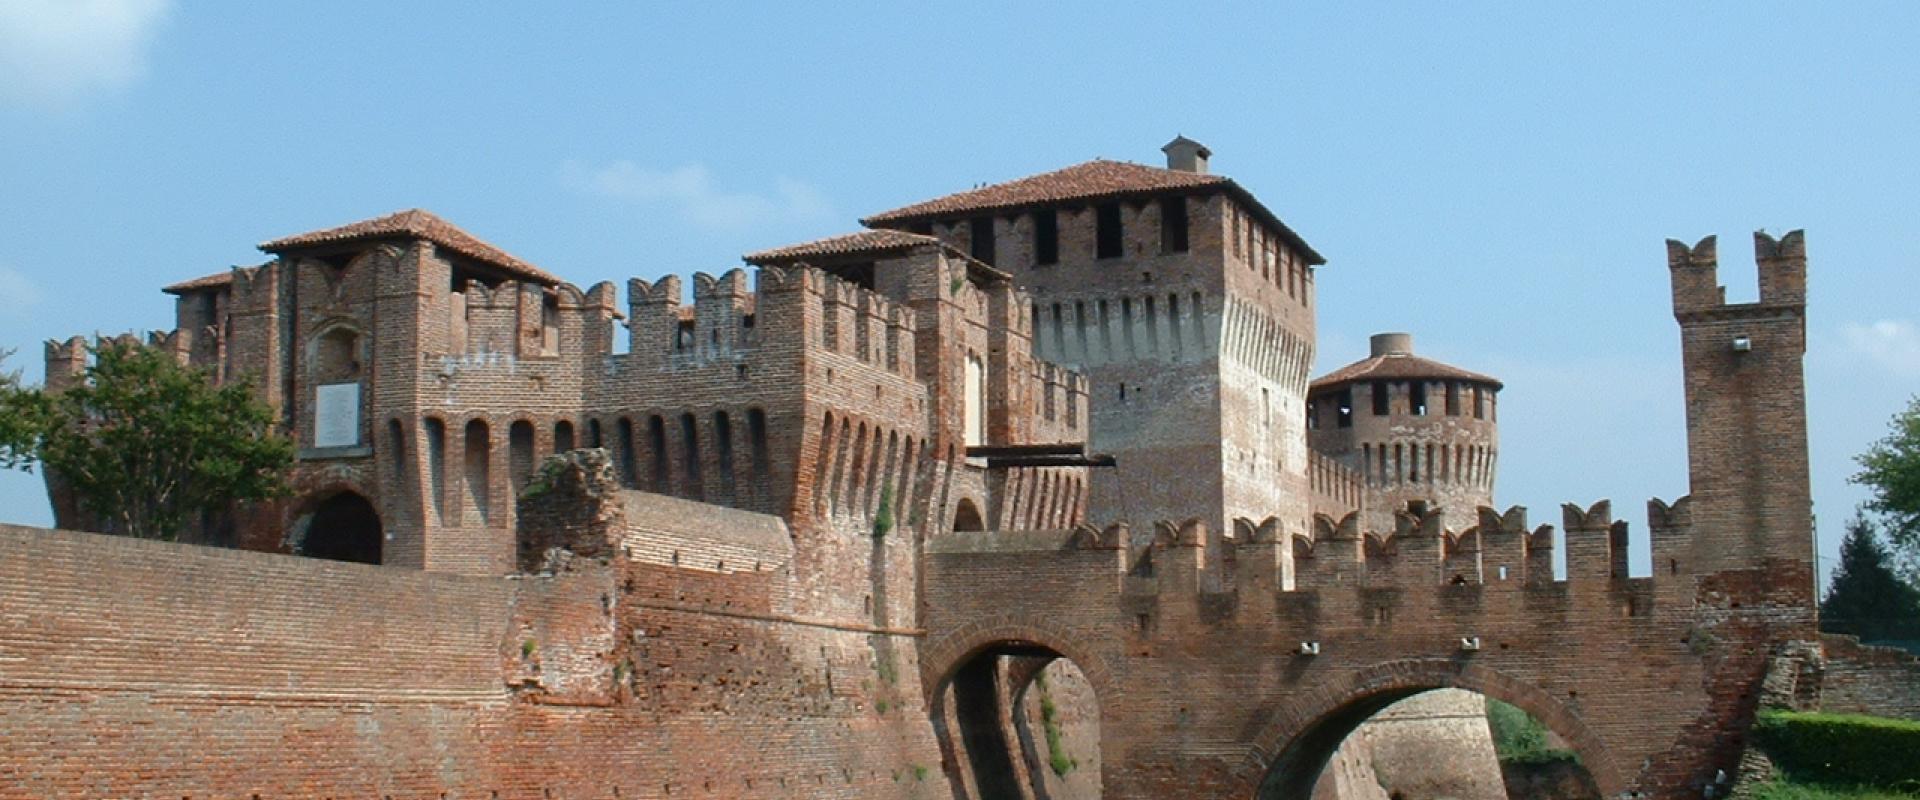 soncino